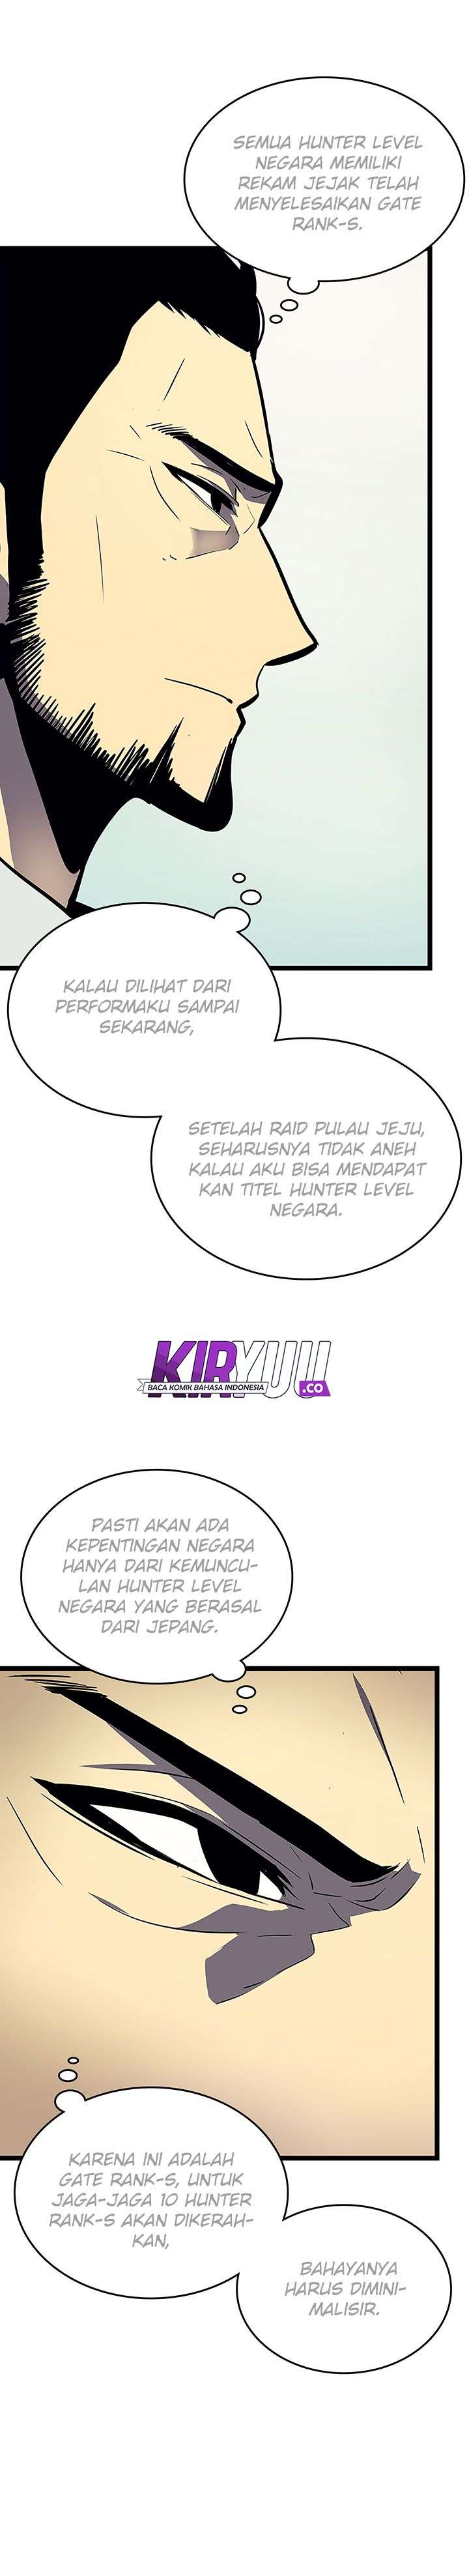 Solo Leveling Chapter 85 Bahasa Indonesia